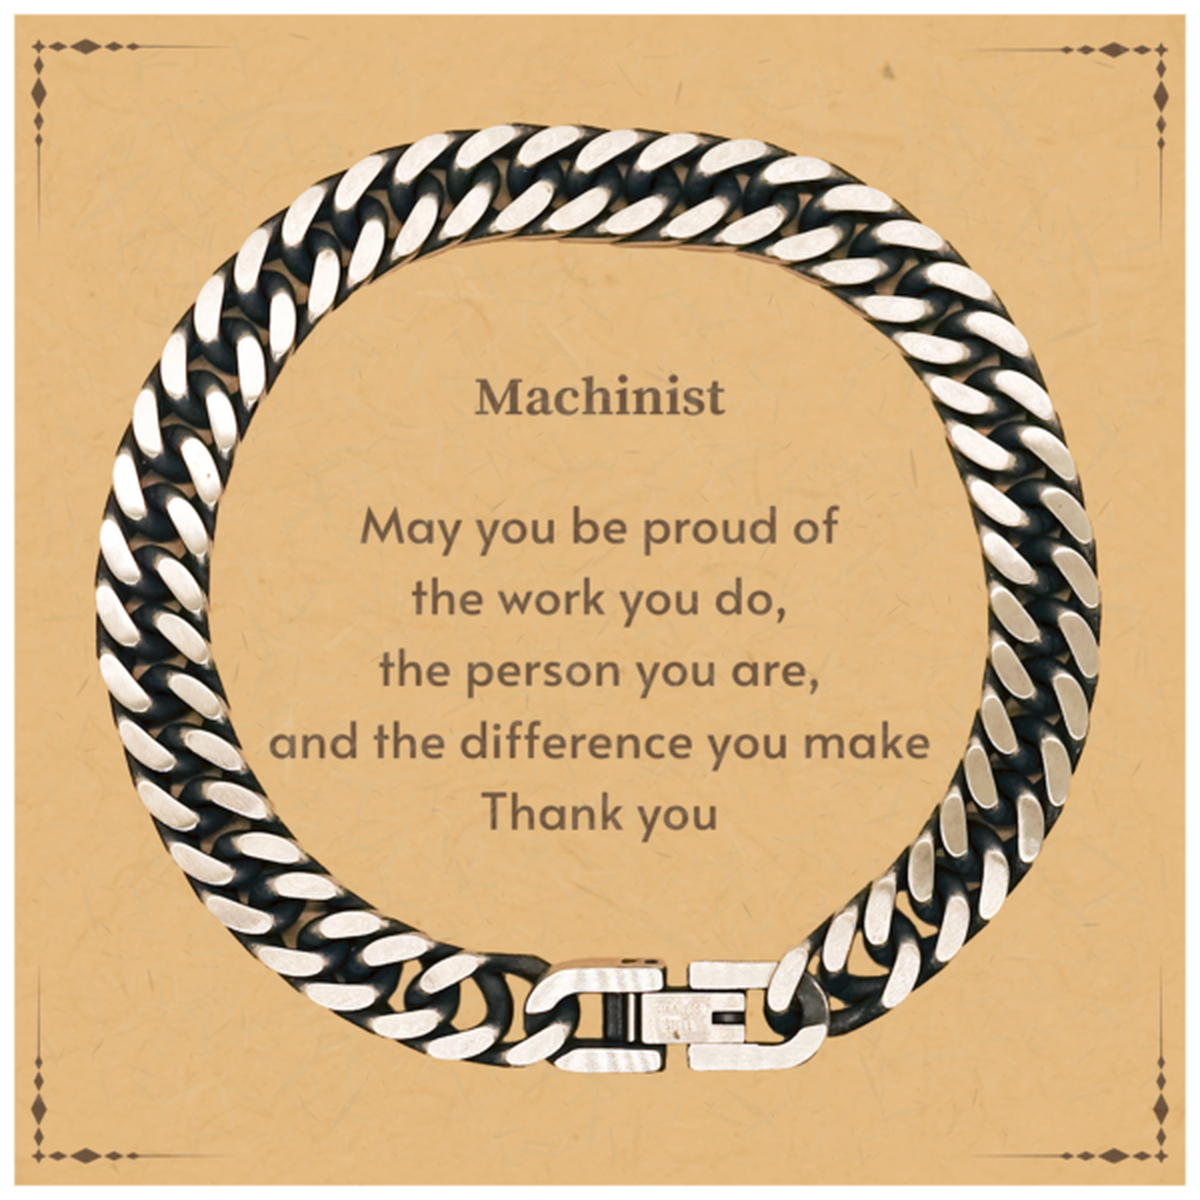 Heartwarming Cuban Link Chain Bracelet Retirement Coworkers Gifts for Machinist, Machinist May You be proud of the work you do, the person you are Gifts for Boss Men Women Friends